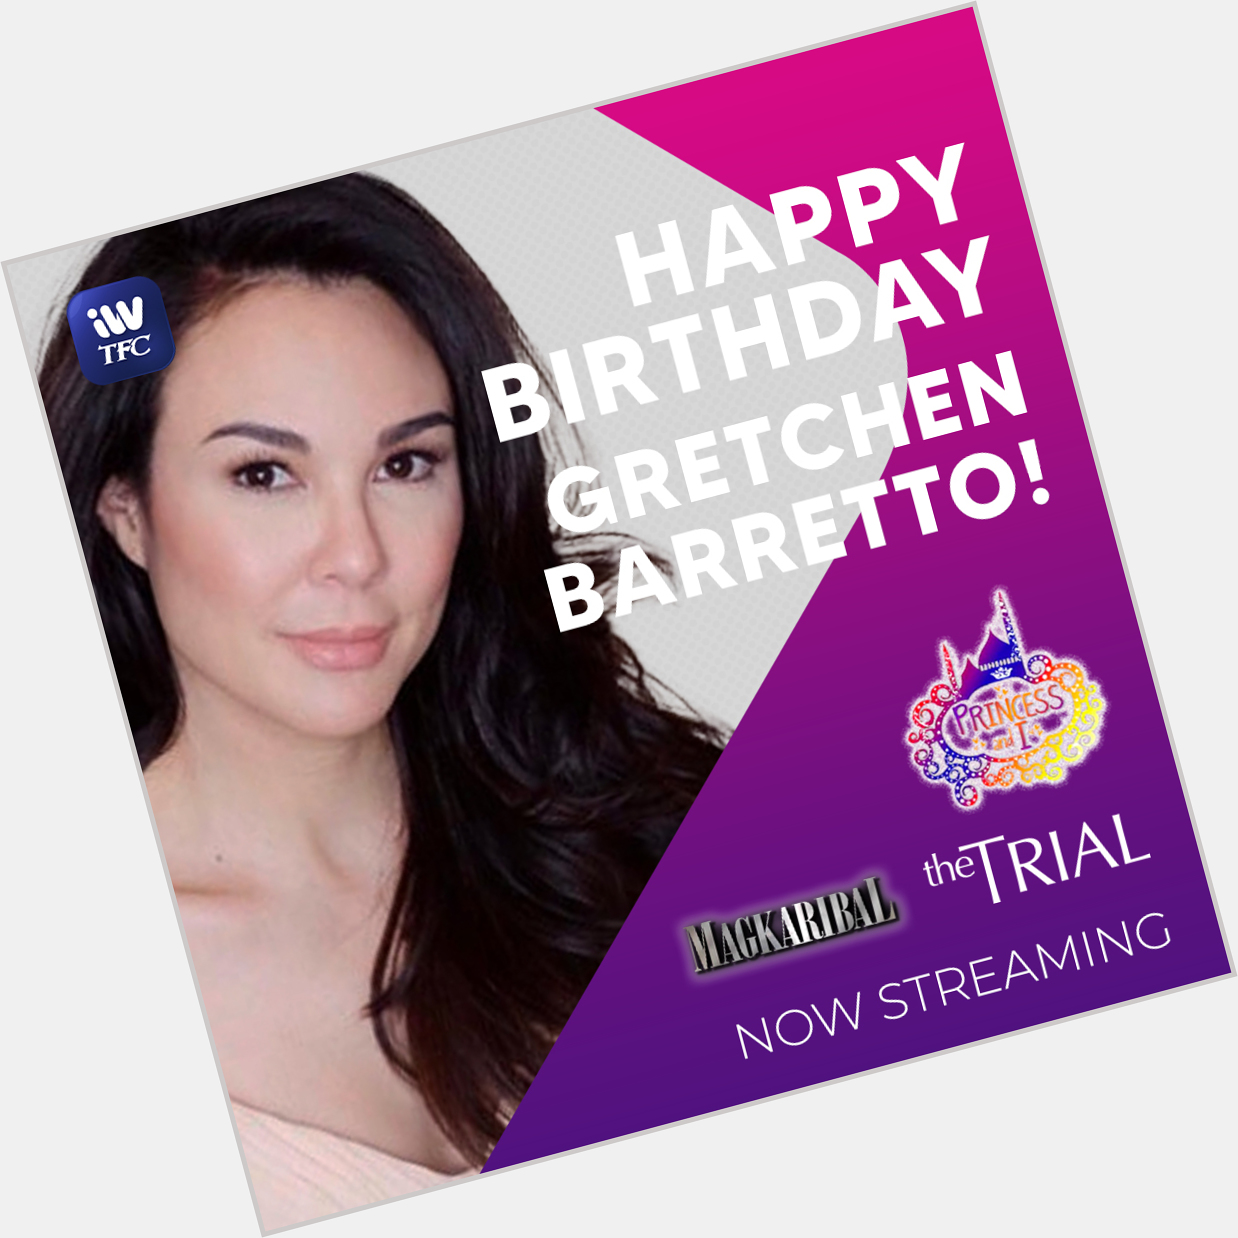 Happy birthday, Ms. Gretchen Barretto!   Catch her in Magkaribal, Princess And I, and The Trial on iWantTFC! 